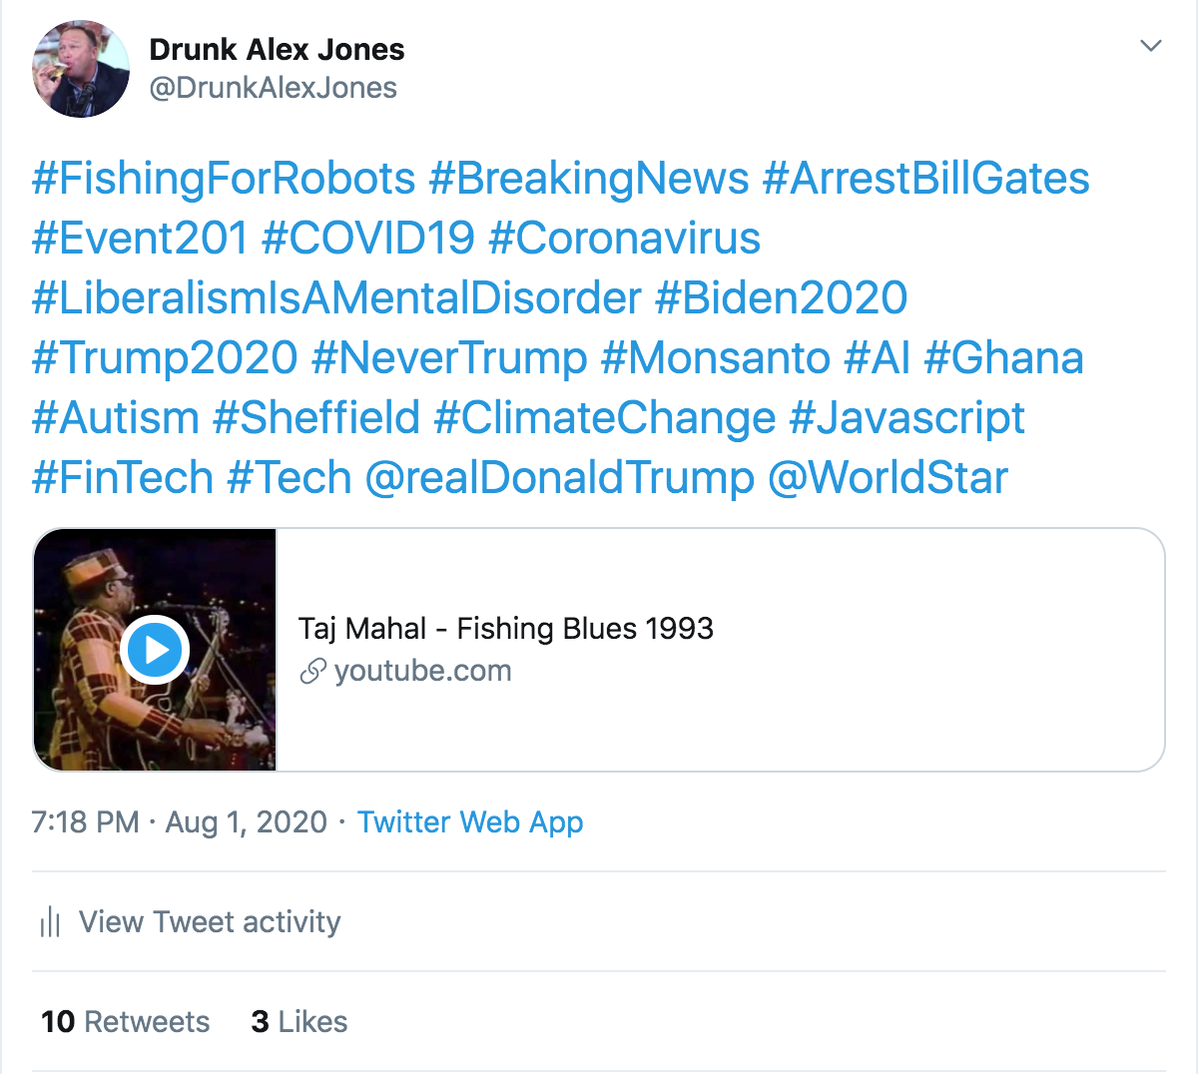 Finally (for now), we had  @DrunkAlexJones post a bot tweet containing the words/hashtags that trigger the bots discussed in this thread. Thus far 10 automated accounts have answered the siren song. https://twitter.com/DrunkAlexJones/status/1289747467257380865